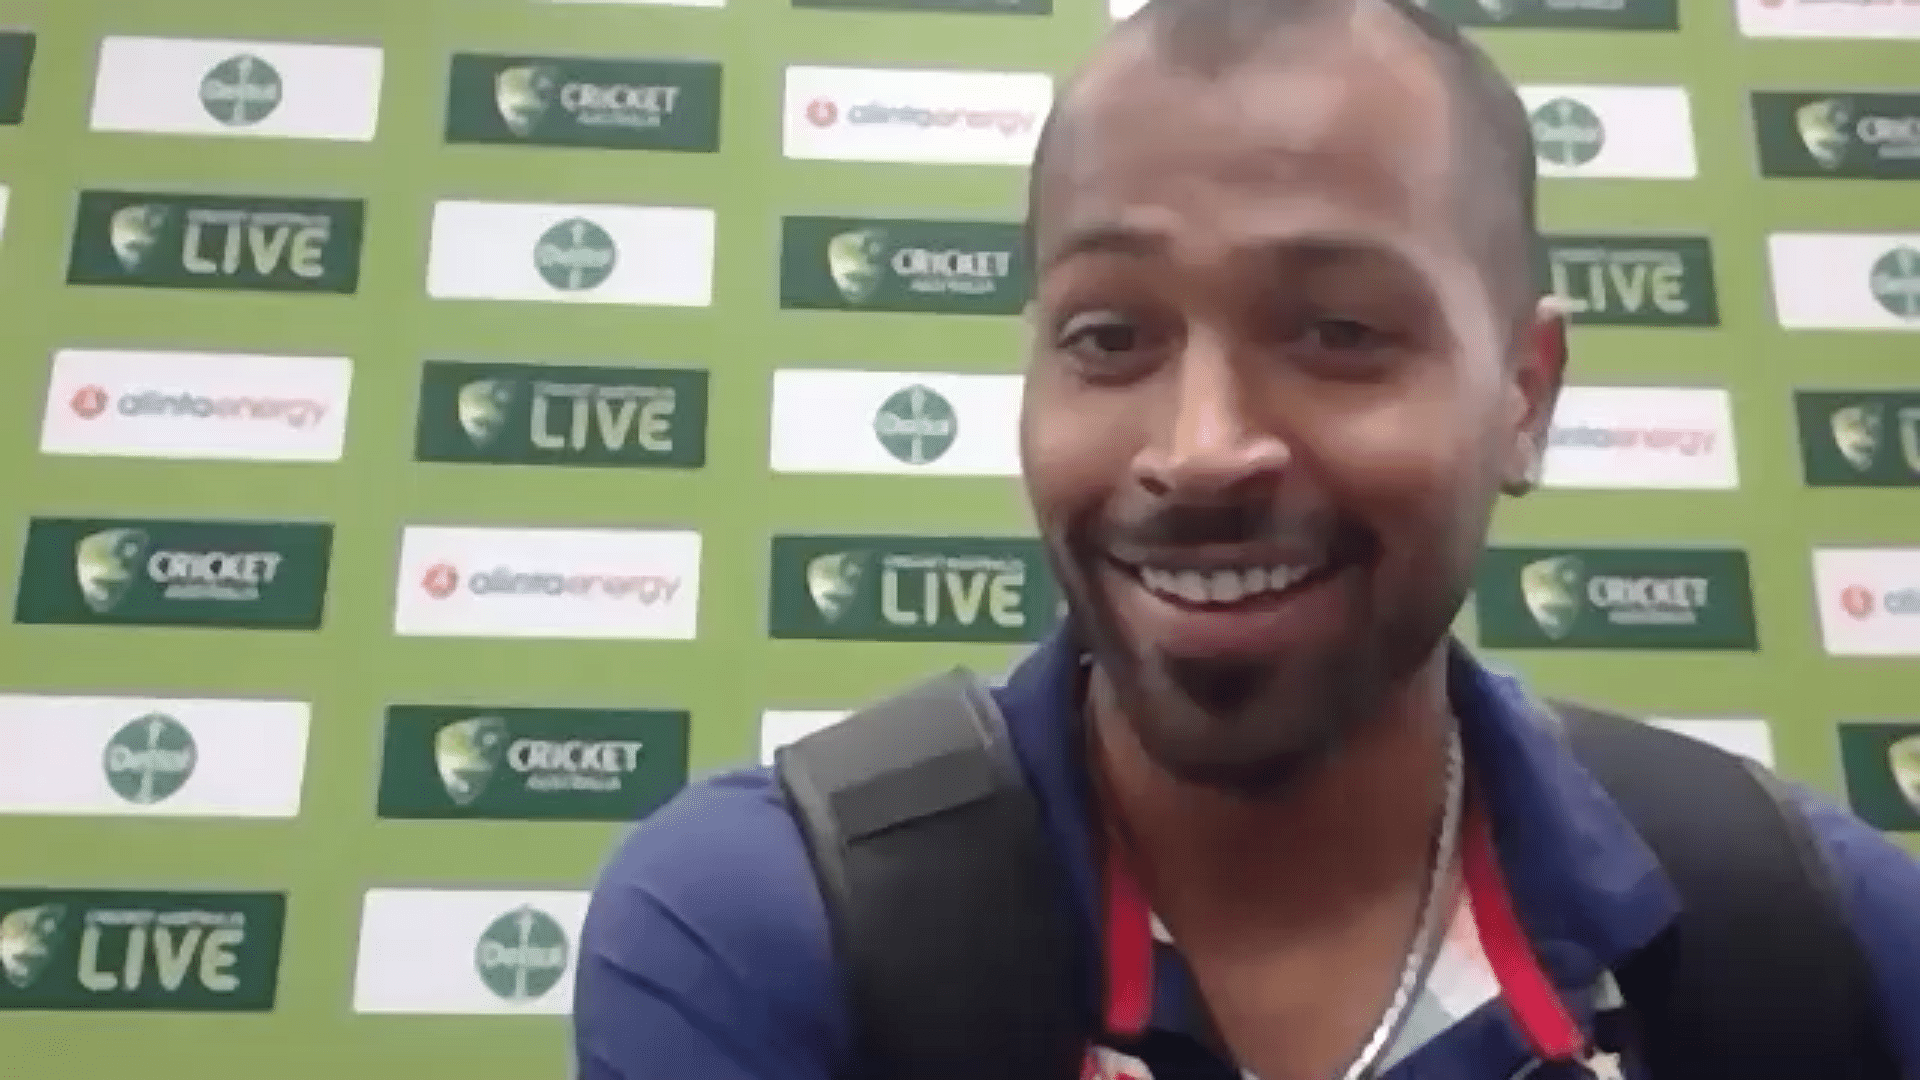 After the T20I series win on Sunday, Hardik Pandya said he thought T Natarajan would be named Man of the Match.